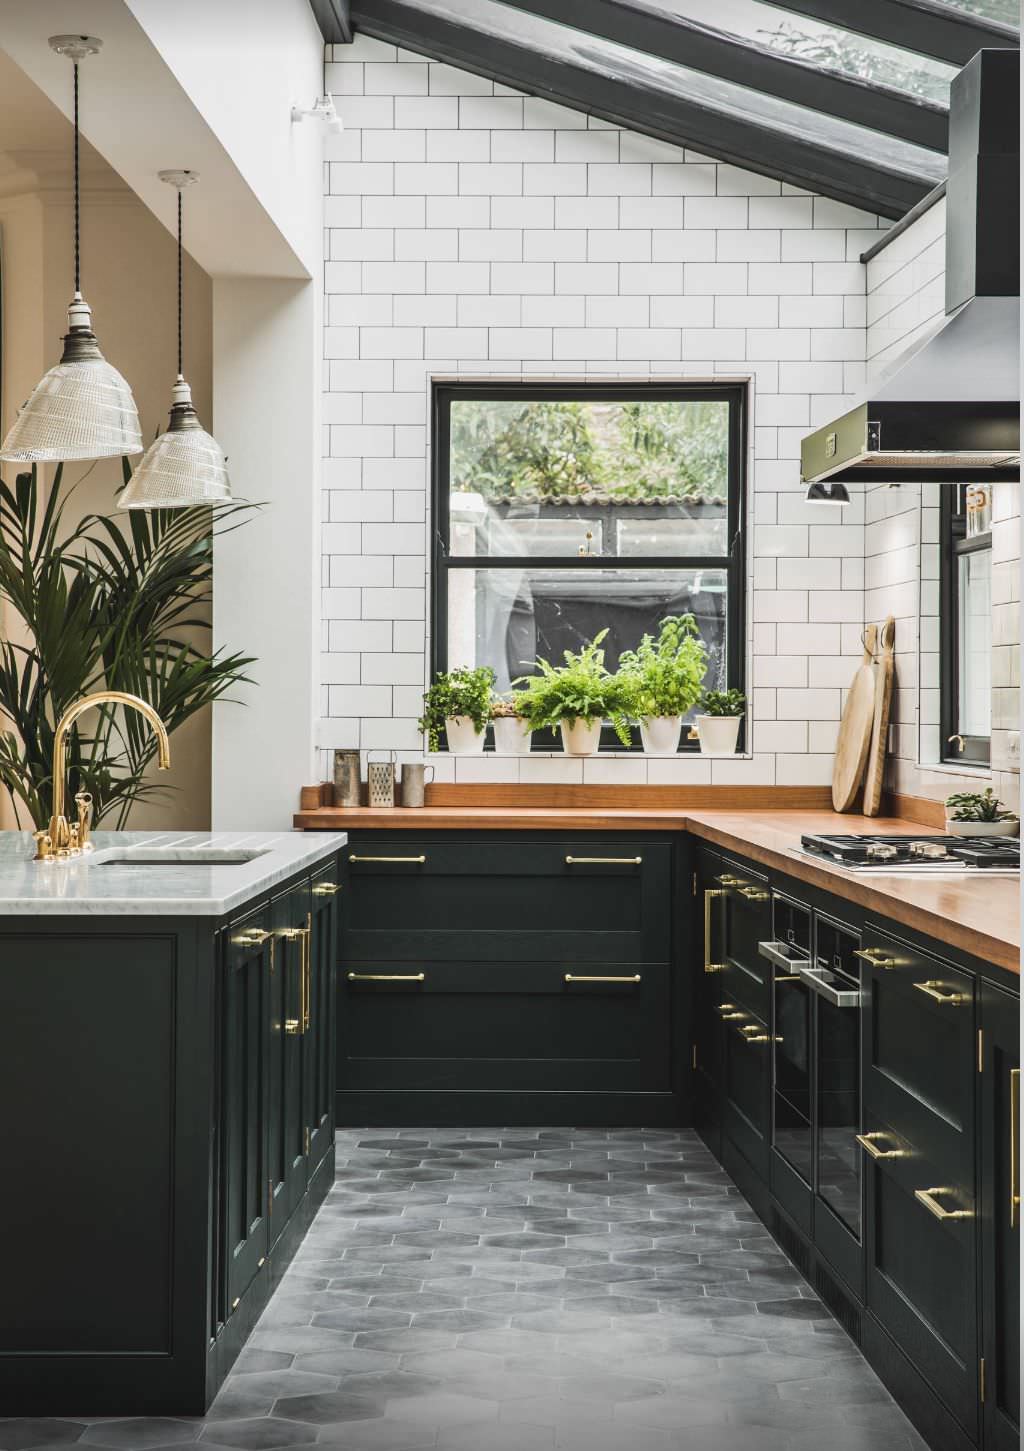 75 Beautiful Marble Floor Kitchen With Black Cabinets Pictures Ideas March 21 Houzz